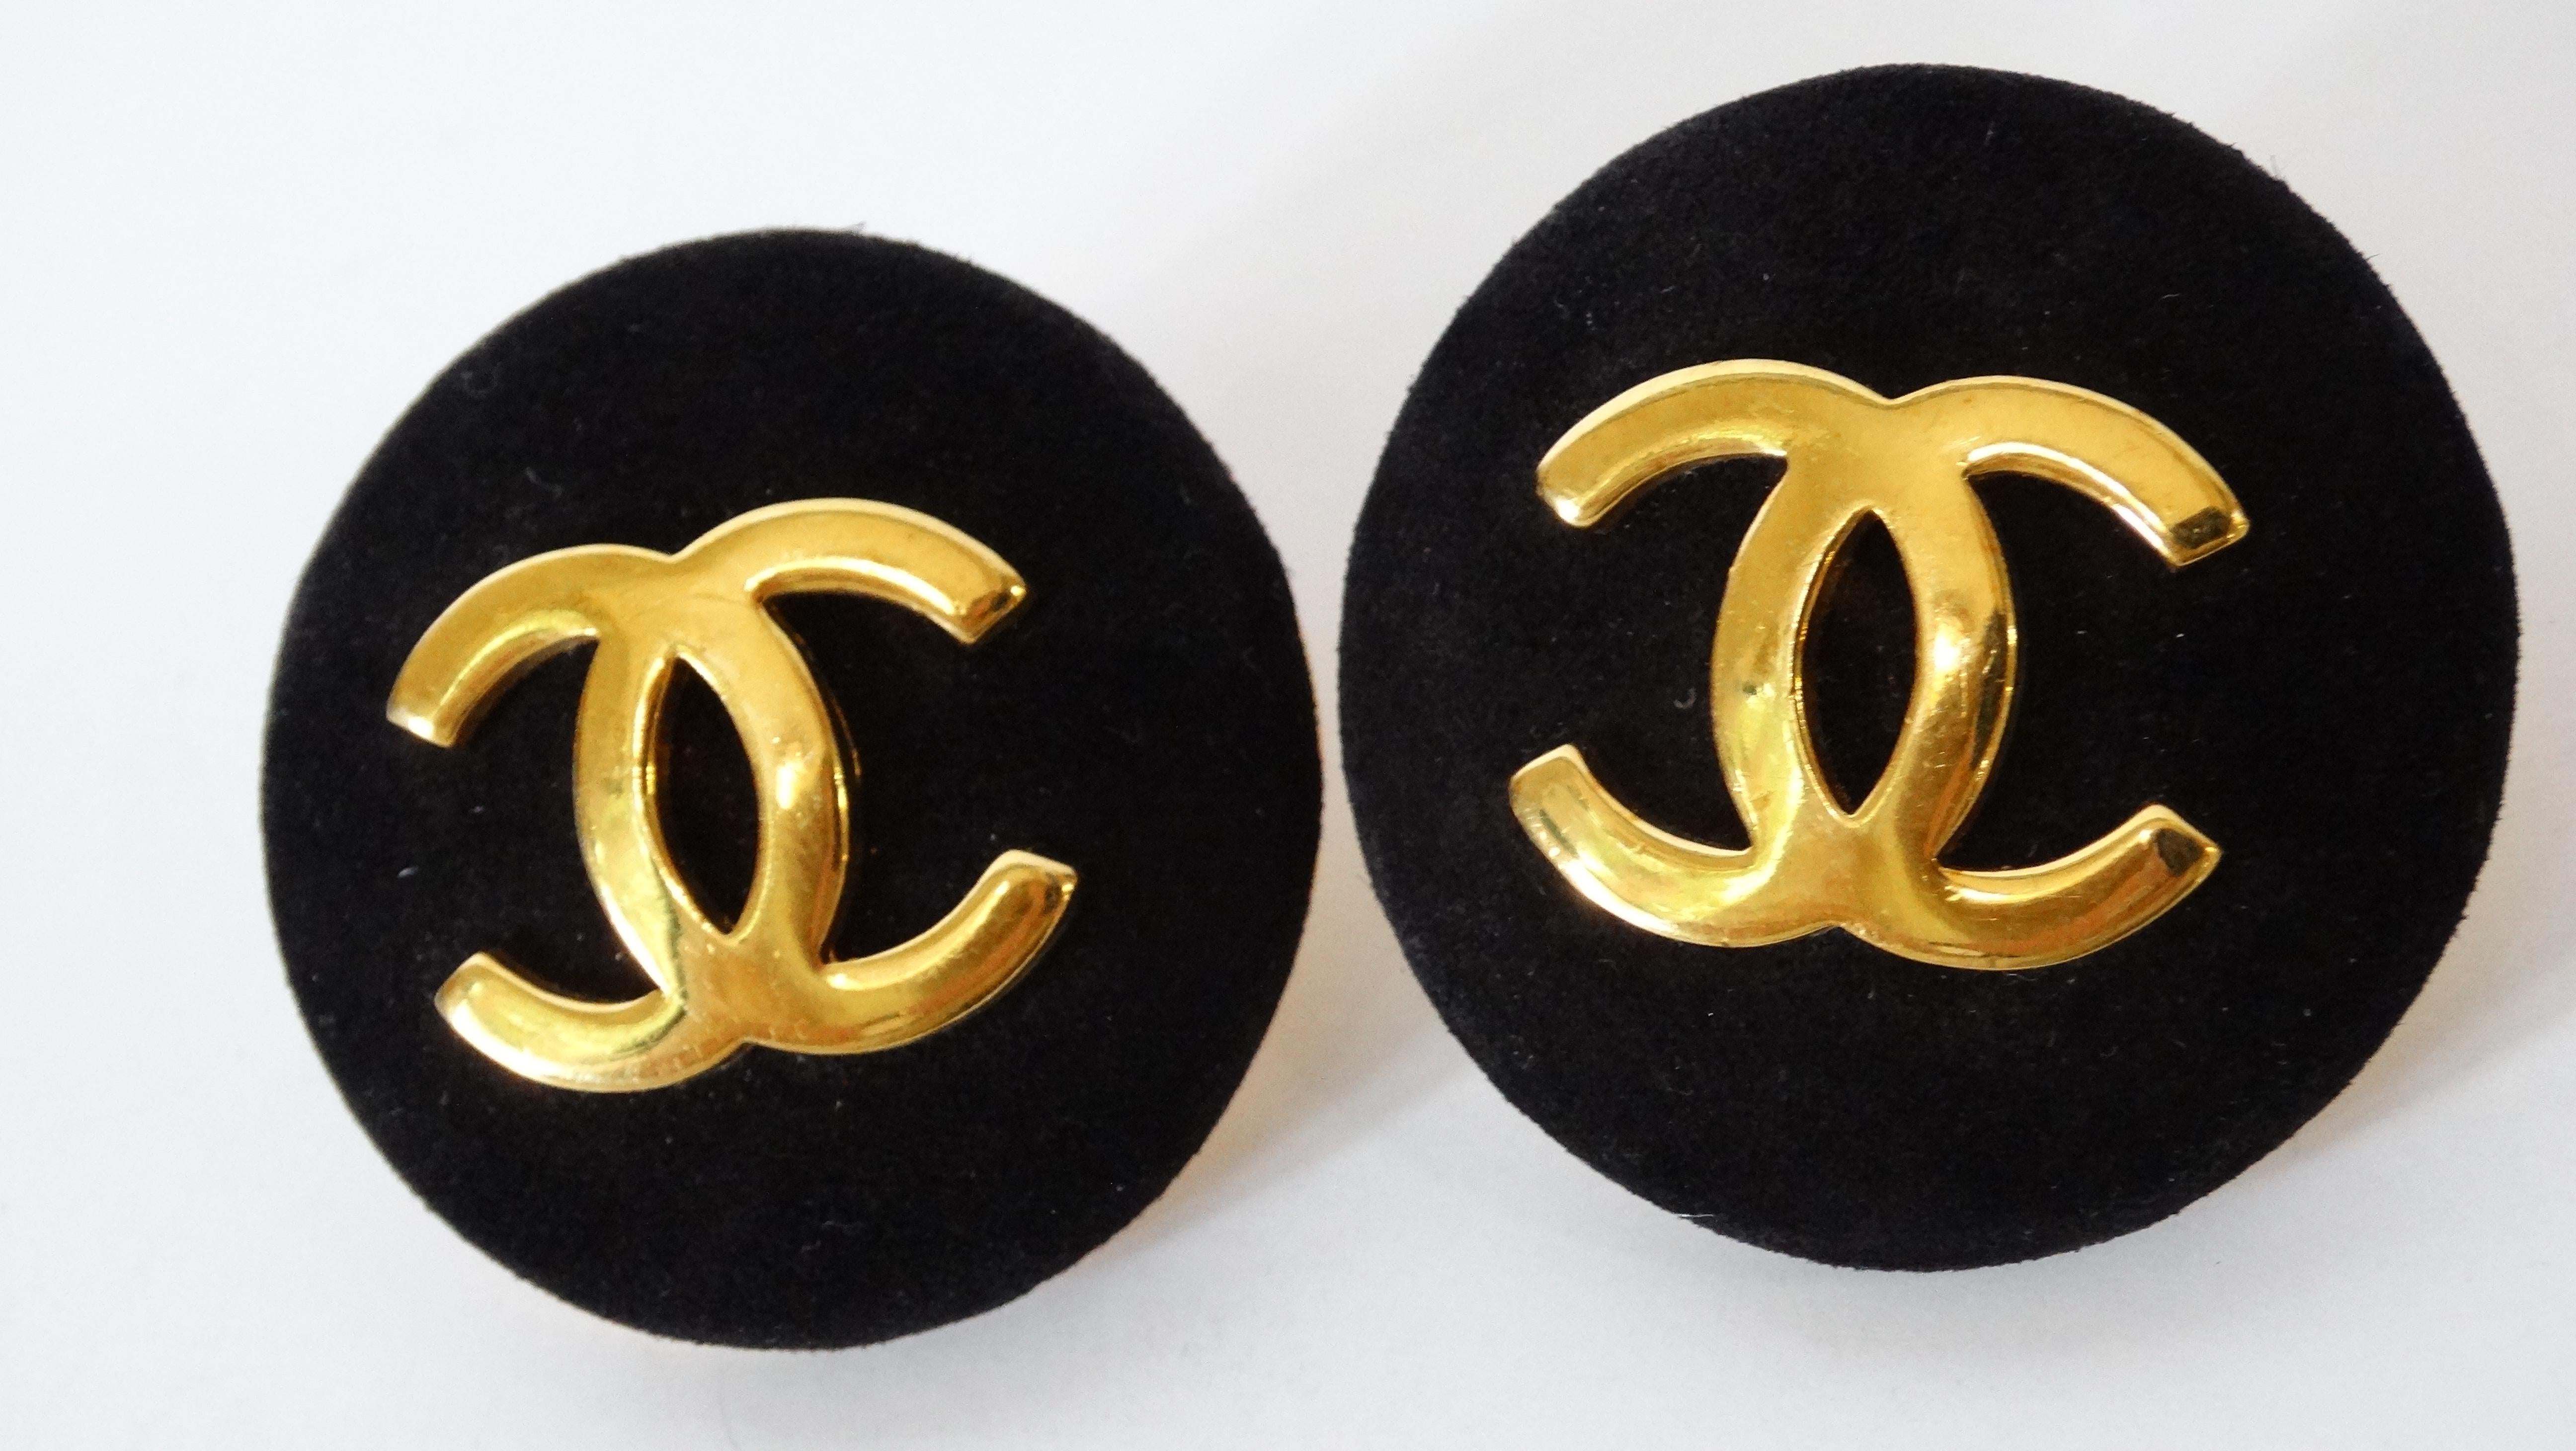 Everyone needs a pair of Chanel button earrings in their collection-and we have the perfect pair for you to snag! Circa 1980s these adorable Chanel earrings are crafted from soft black suede and feature the signature Chanel 